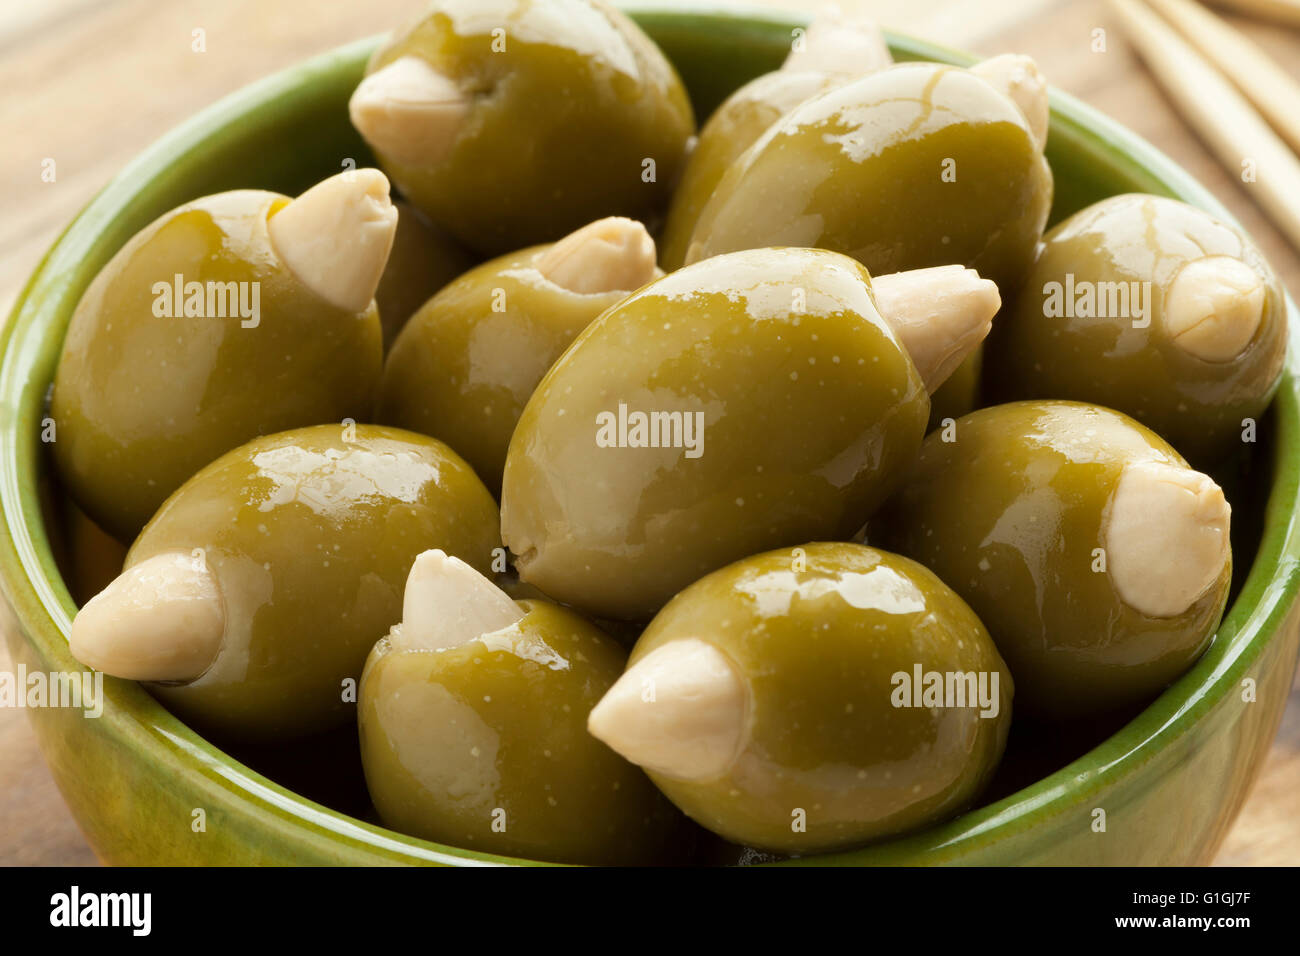 Bowl with green olives stuffed with an almond Stock Photo